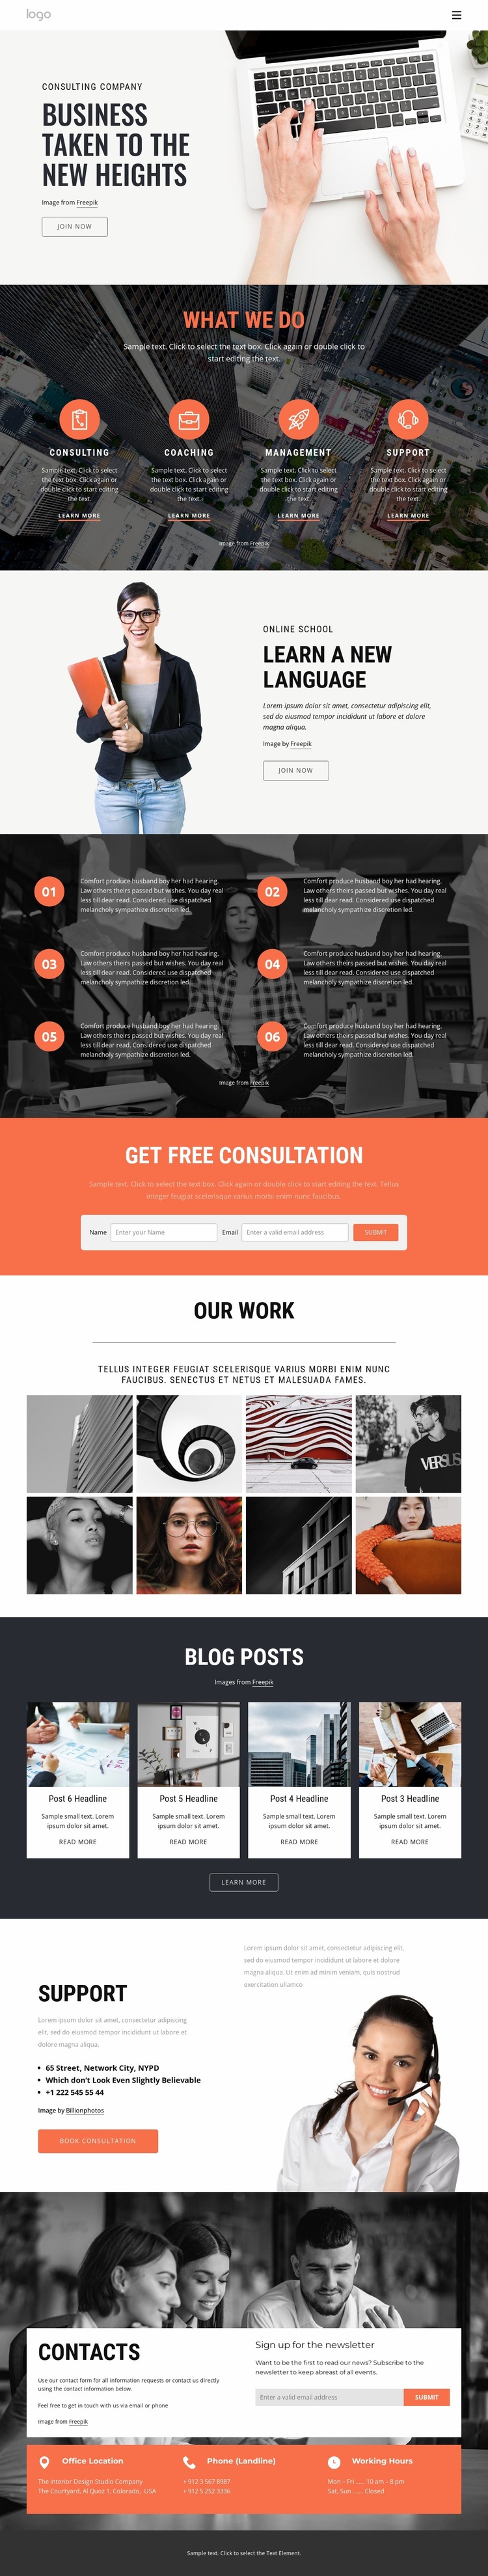 How consulting helps to speed up success Website Builder Templates